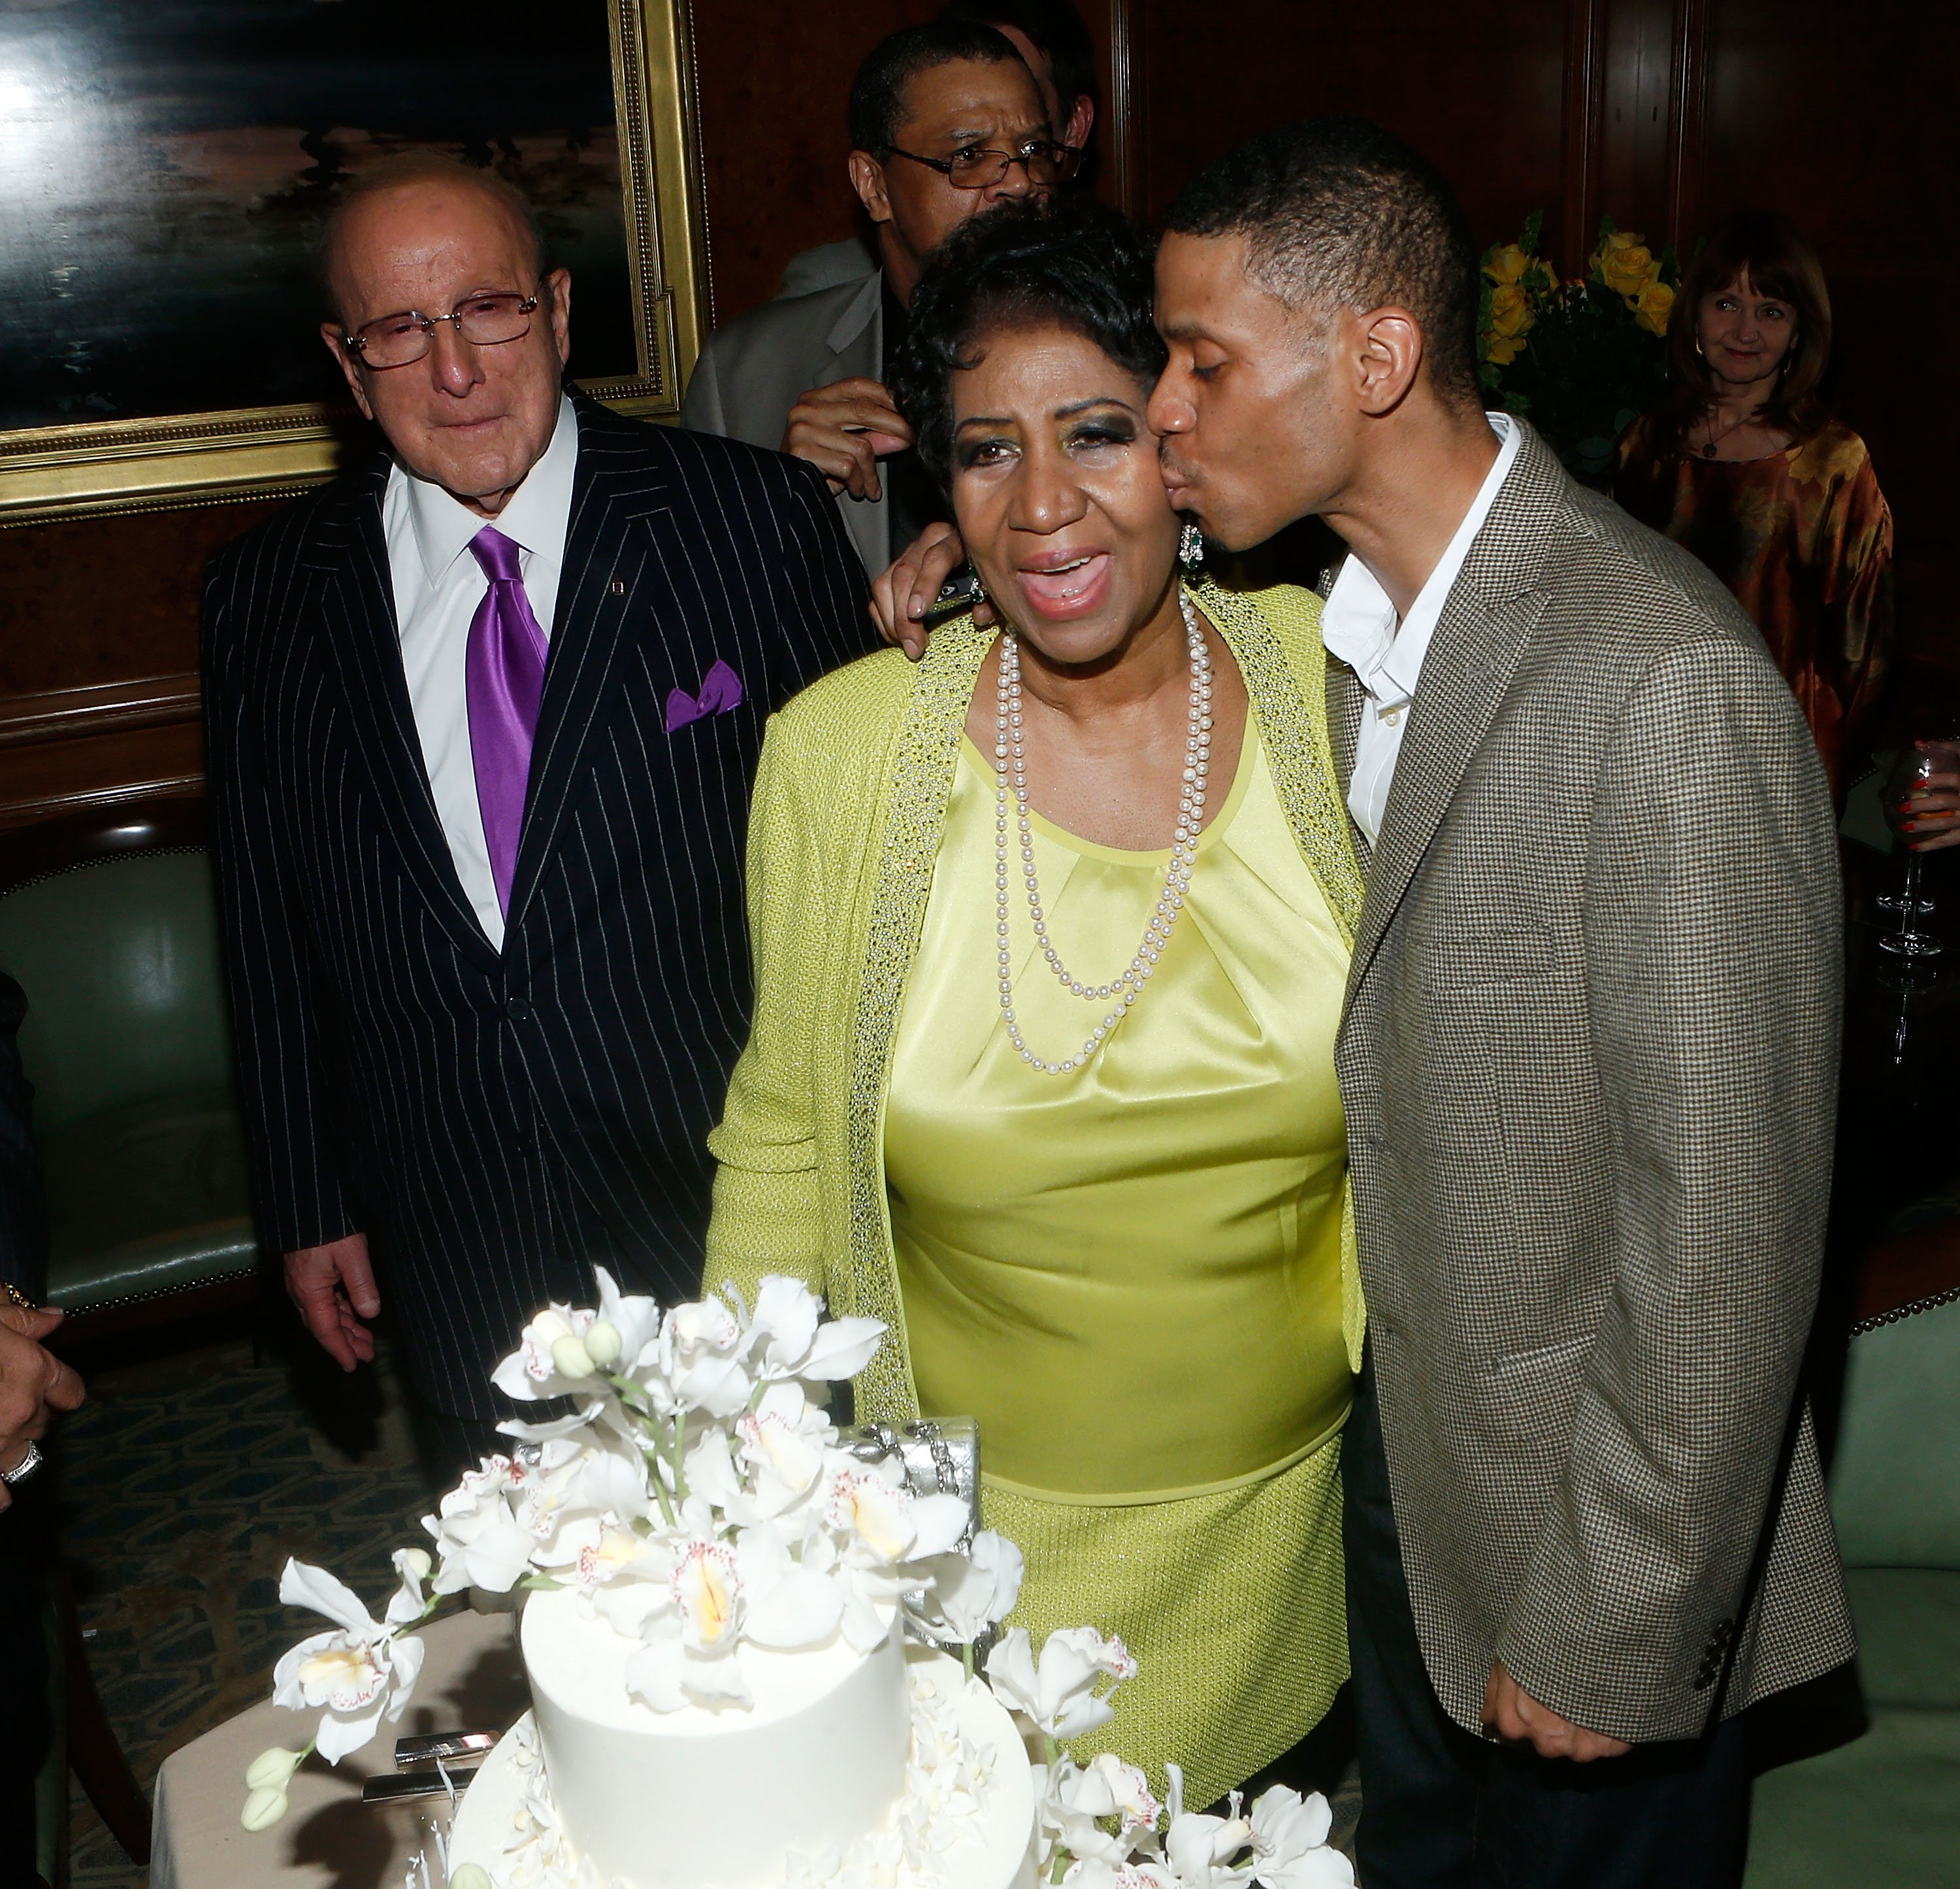 Aretha Franklin & son Kecalf Cunningham at her 72nd Birthday Celebration in New York City on March 22, 2014 | Photo: Getty Images